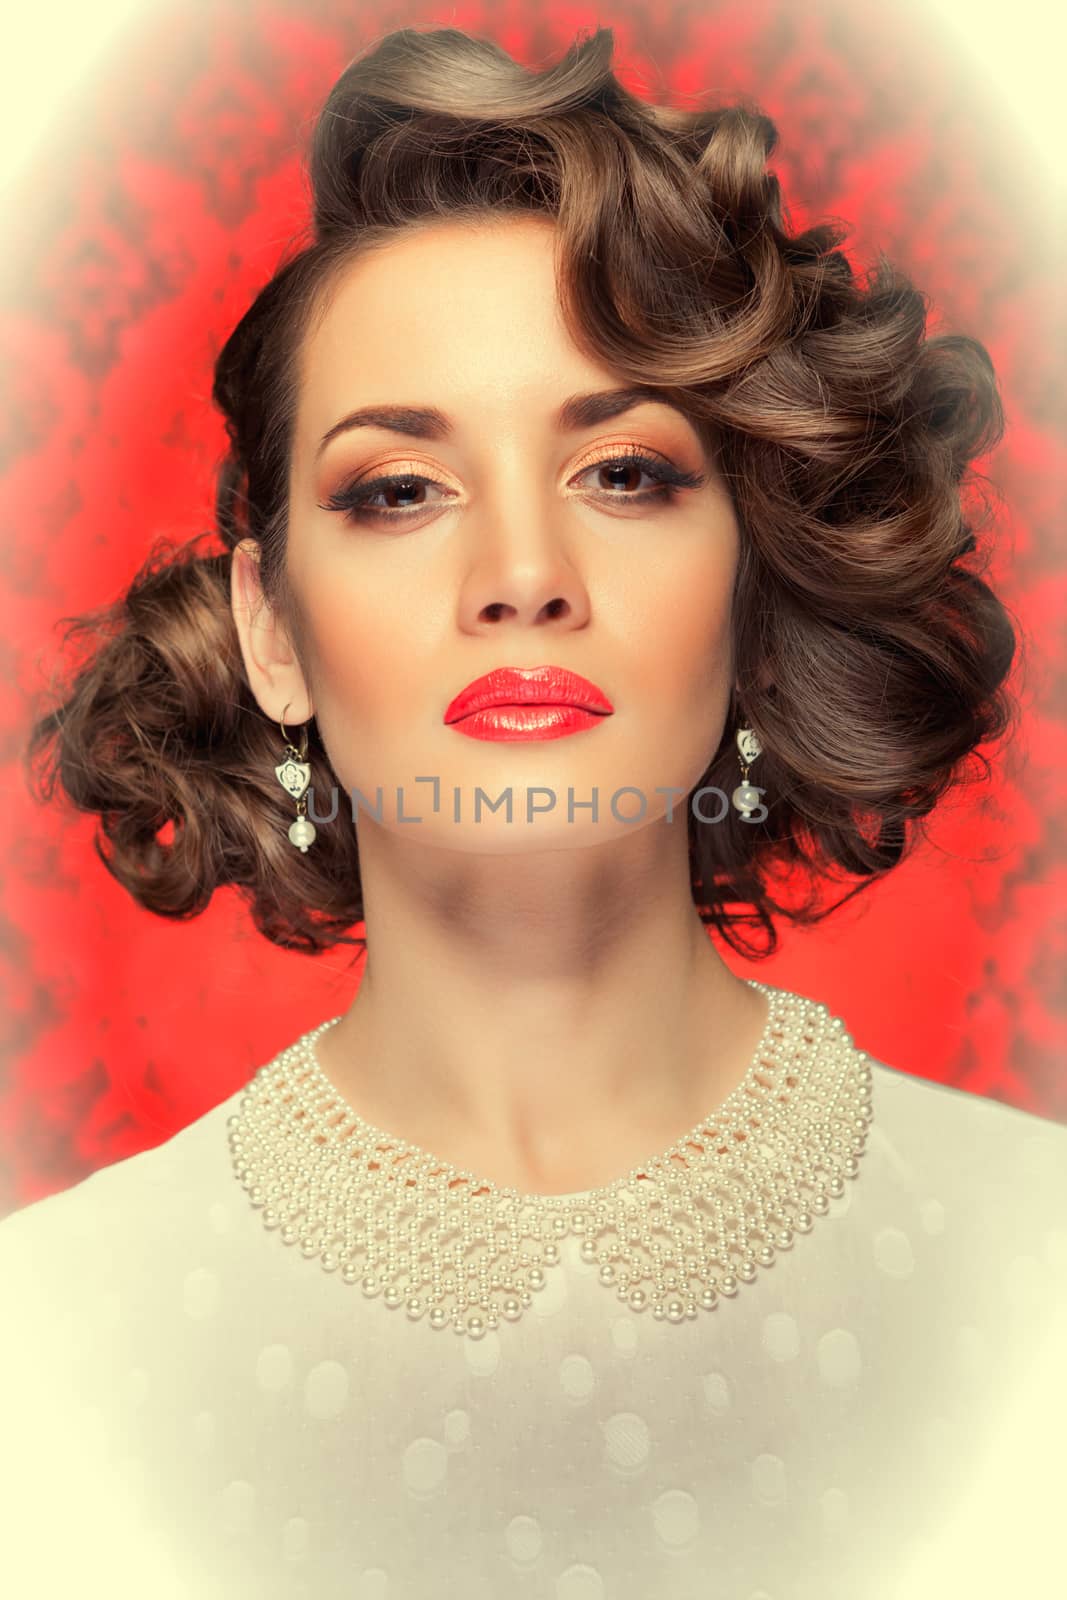 Retro style woman toned image on red vintage background by DCStudio